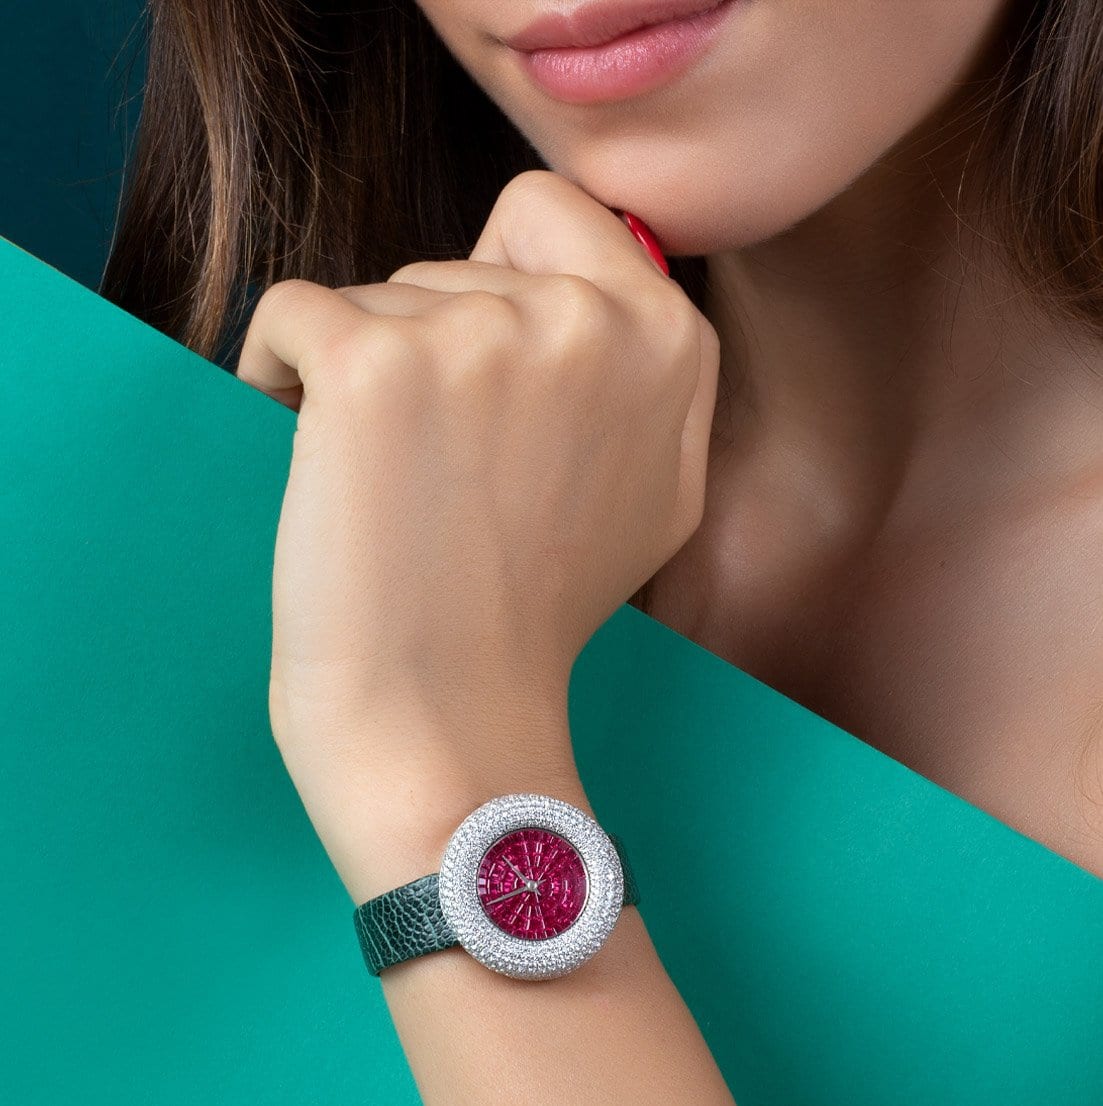 Ruby Fever, MOSAIC Watch